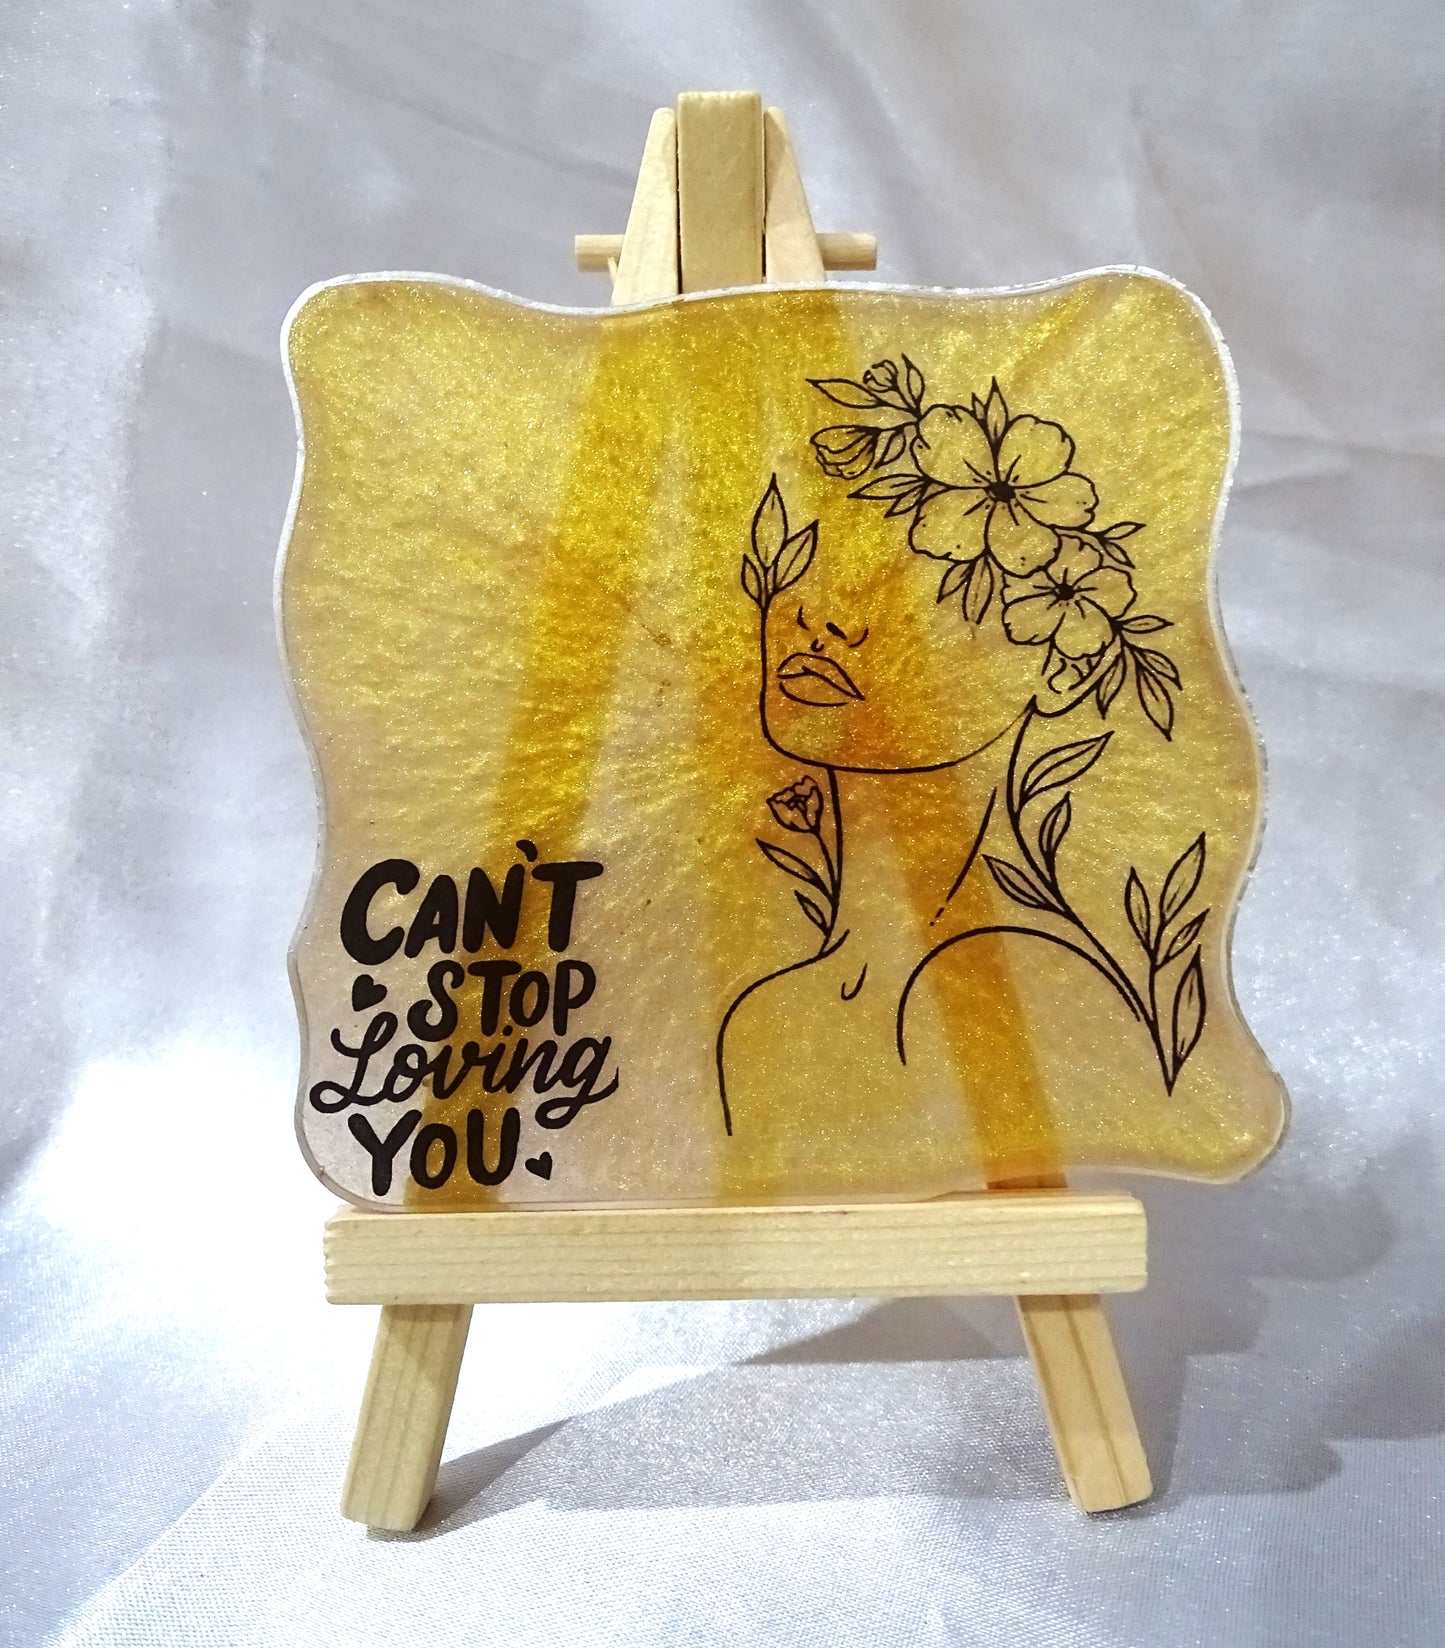 Night Lamp "CAN'T Stop Loving You"